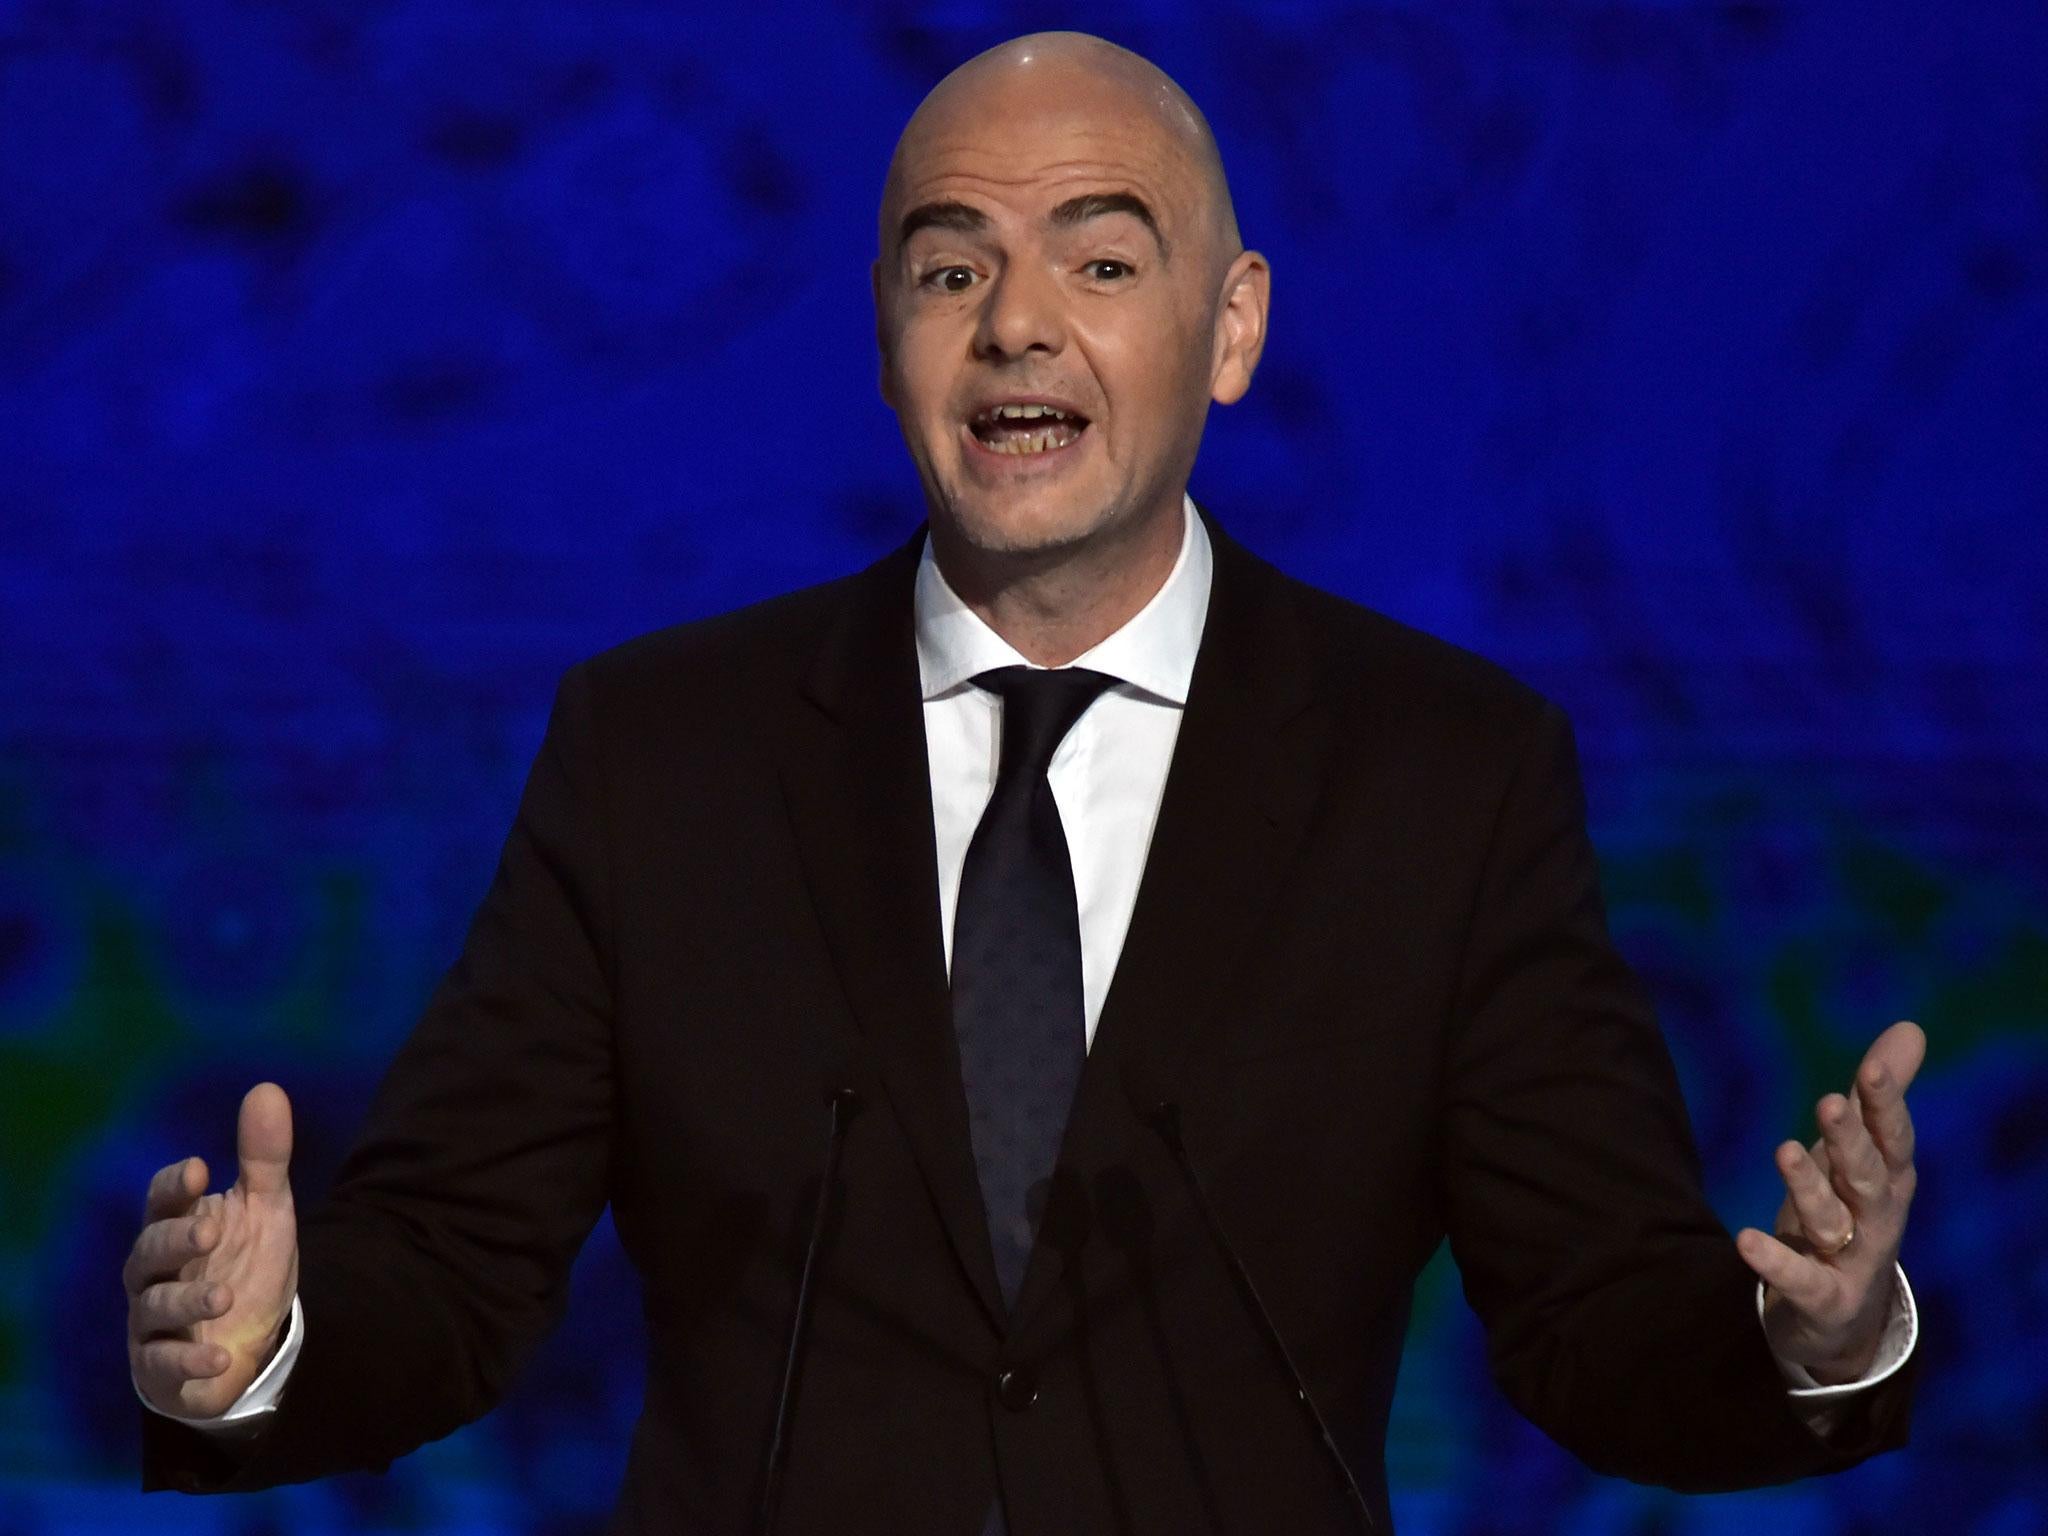 Fifa president Gianni Infantino has been told not to make unnecessary changes to the World Cup